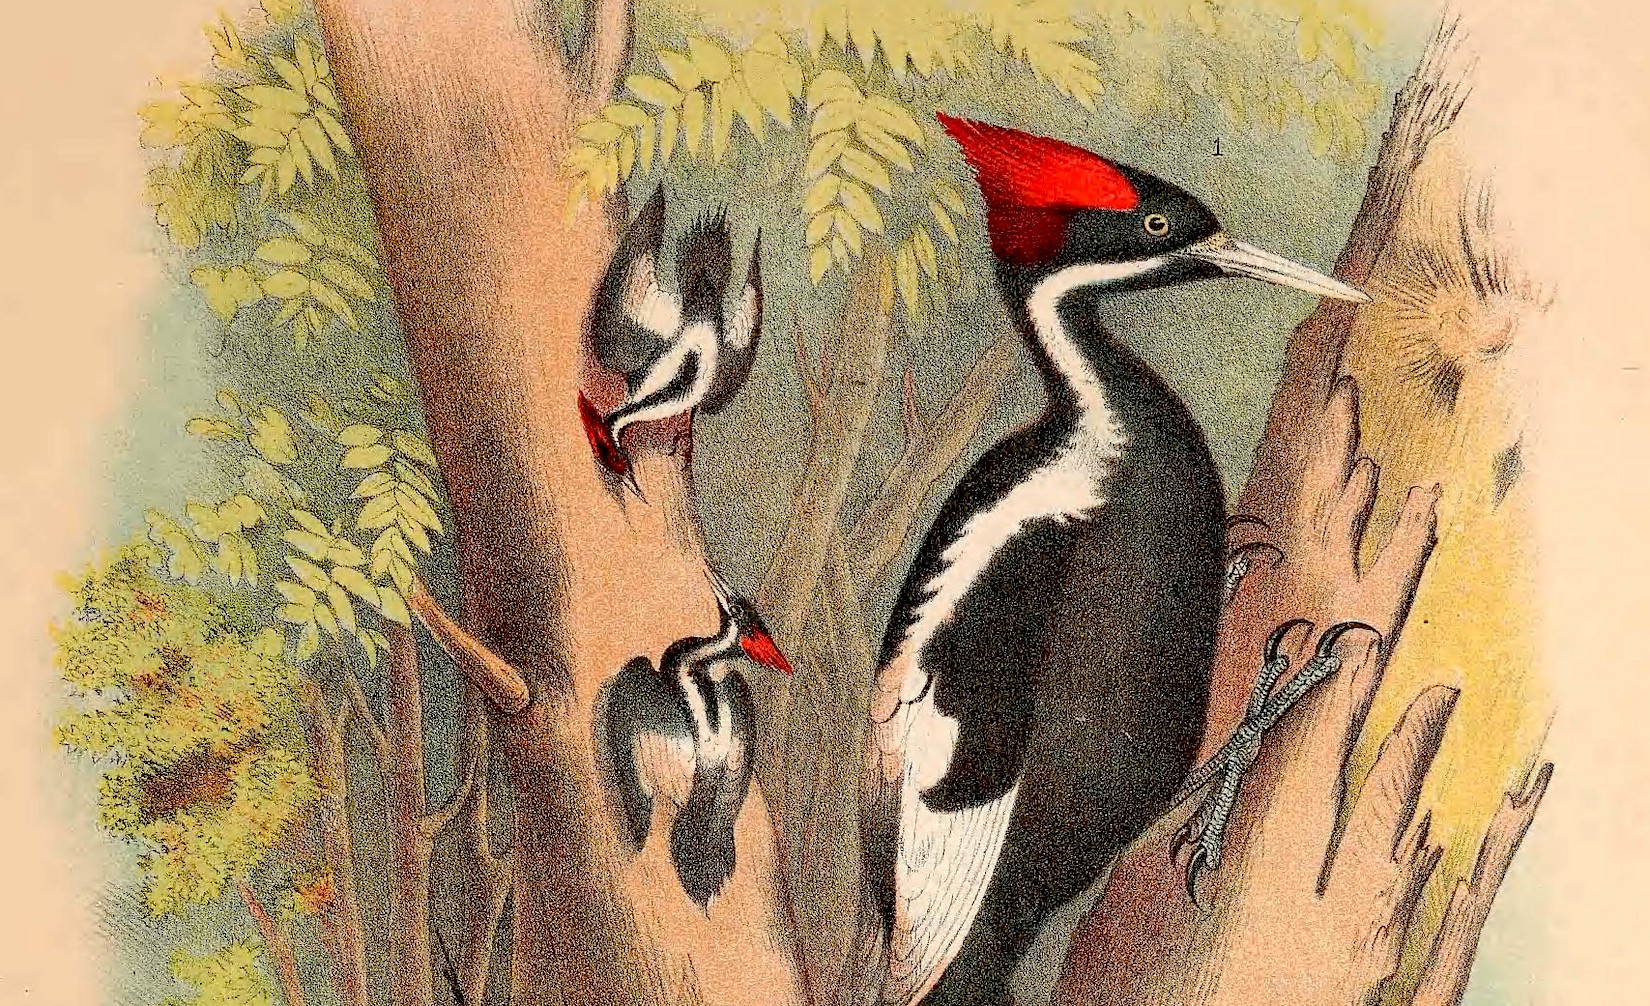 Why The IvoryBilled Woodpecker Is Still Raising Questions